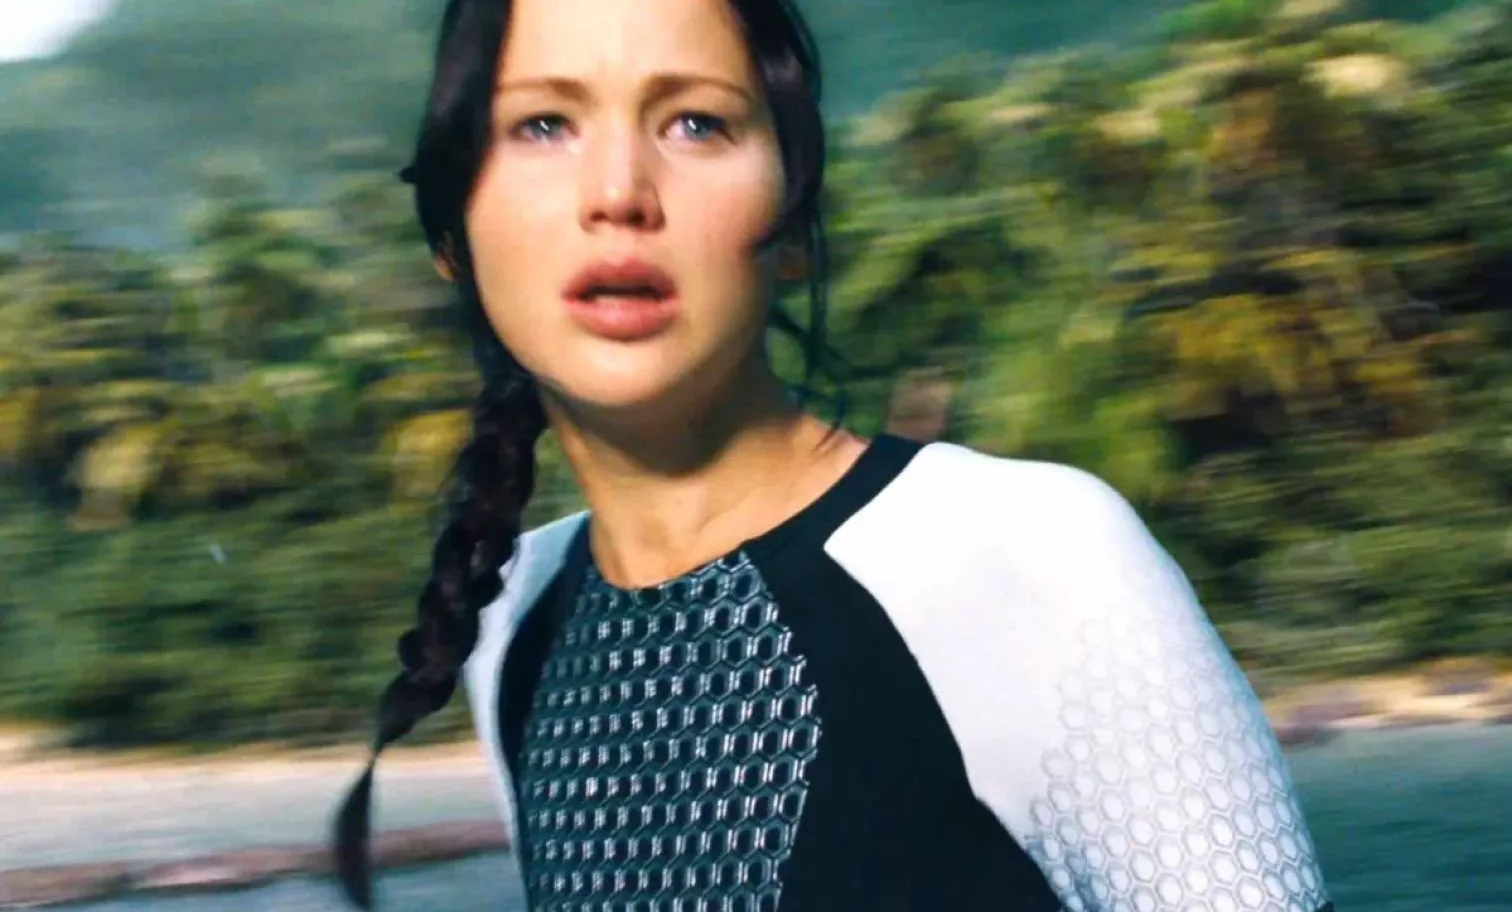 Katniss Everdeen, played by Jennifer Lawrence, enters the arena of the third Quarter Quell in the second movie of the Hunger Games saga, Catching Fire